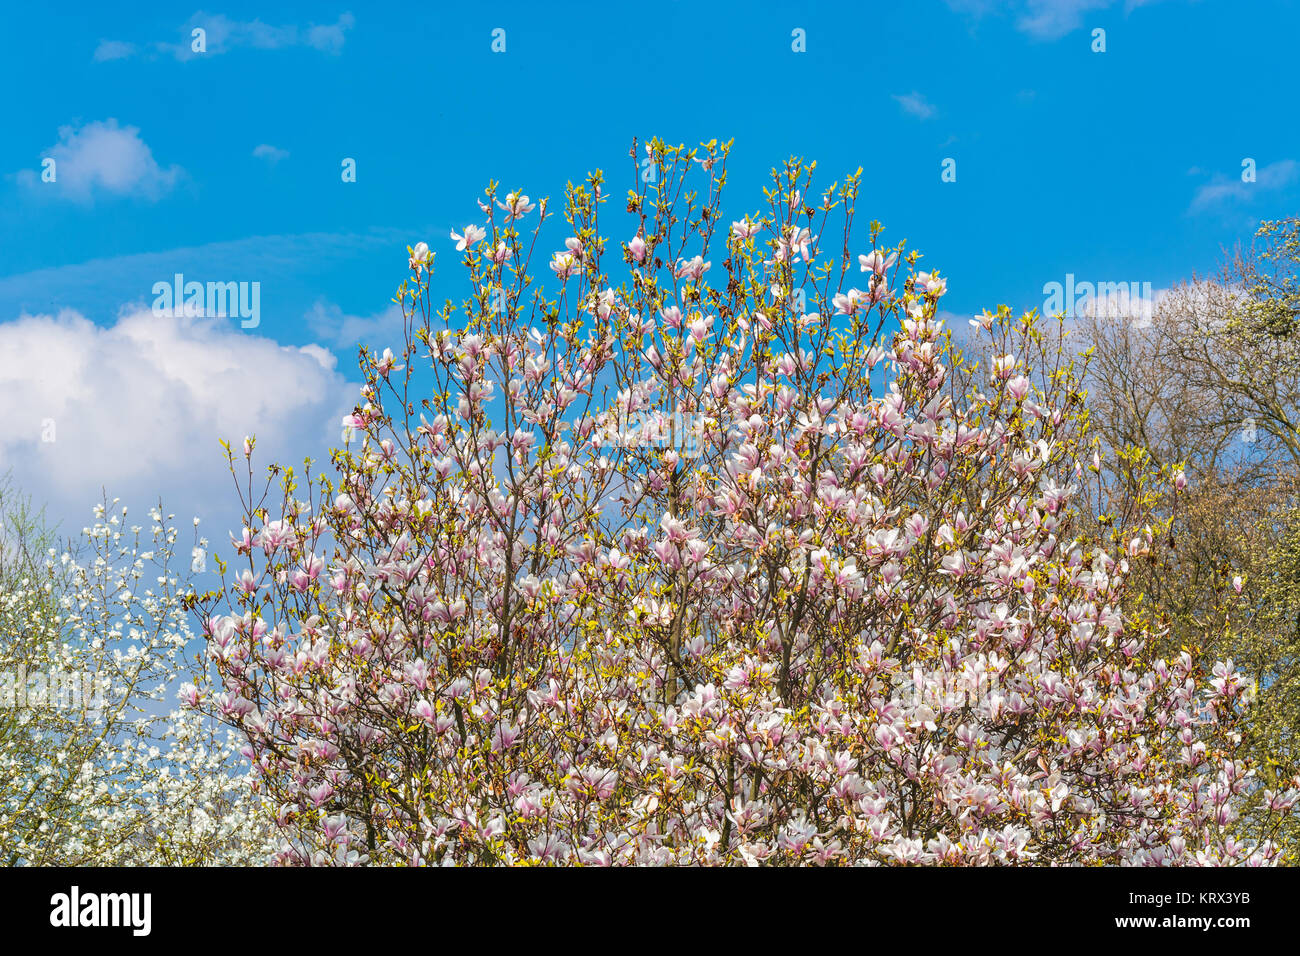 spring picture with flowering fruit tree in the garden. Stock Photo